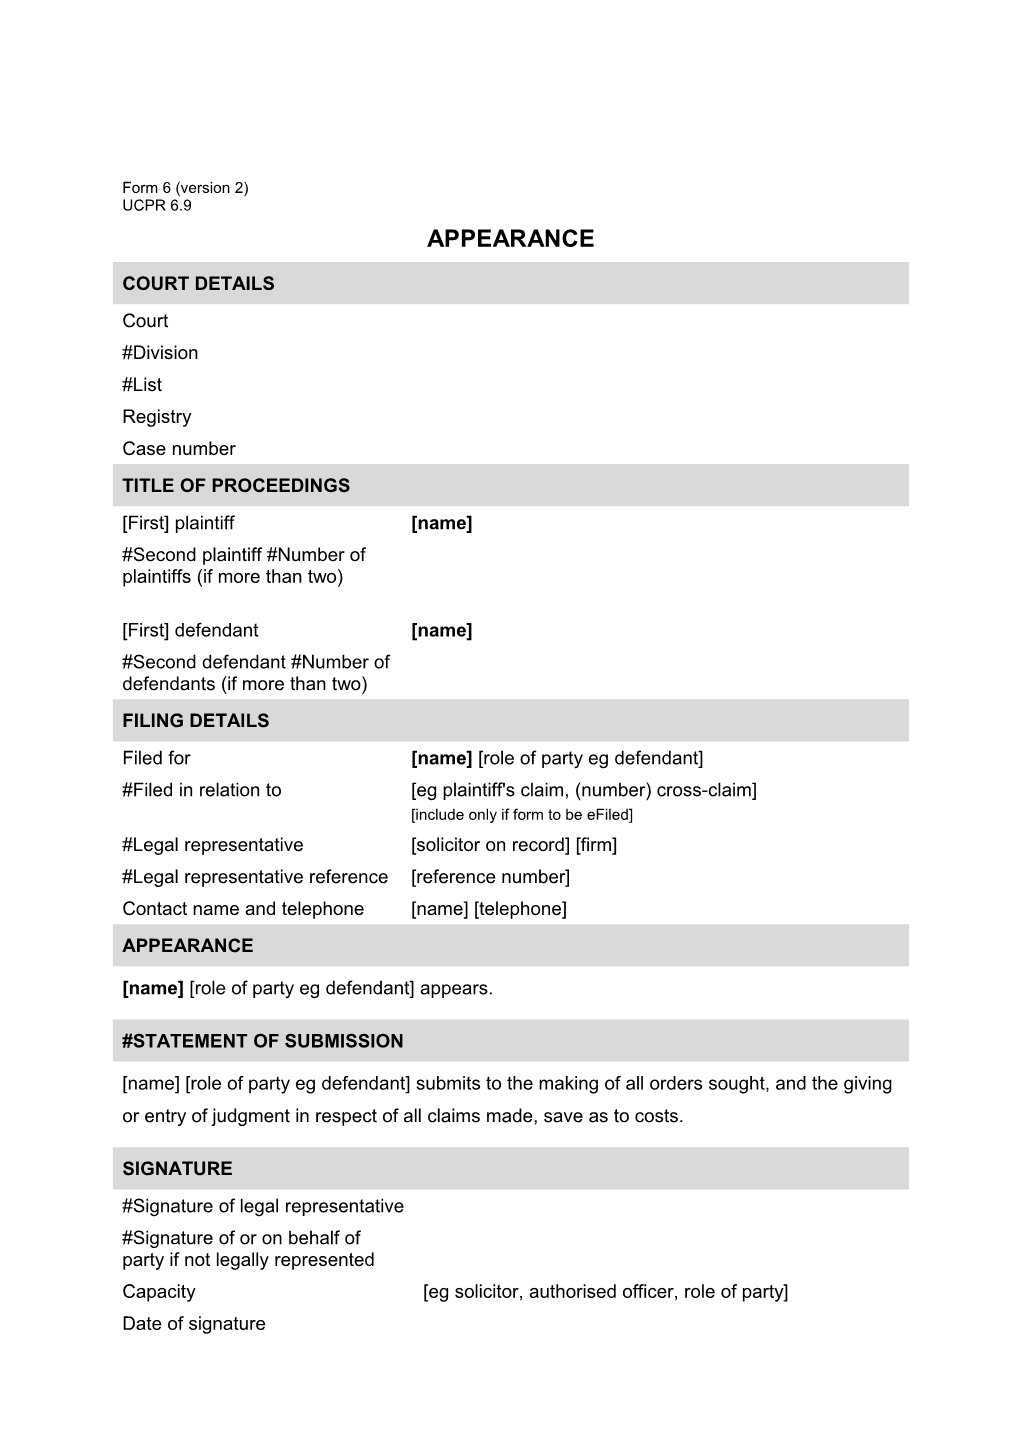 NSW UCPR Form 6 - Appearance